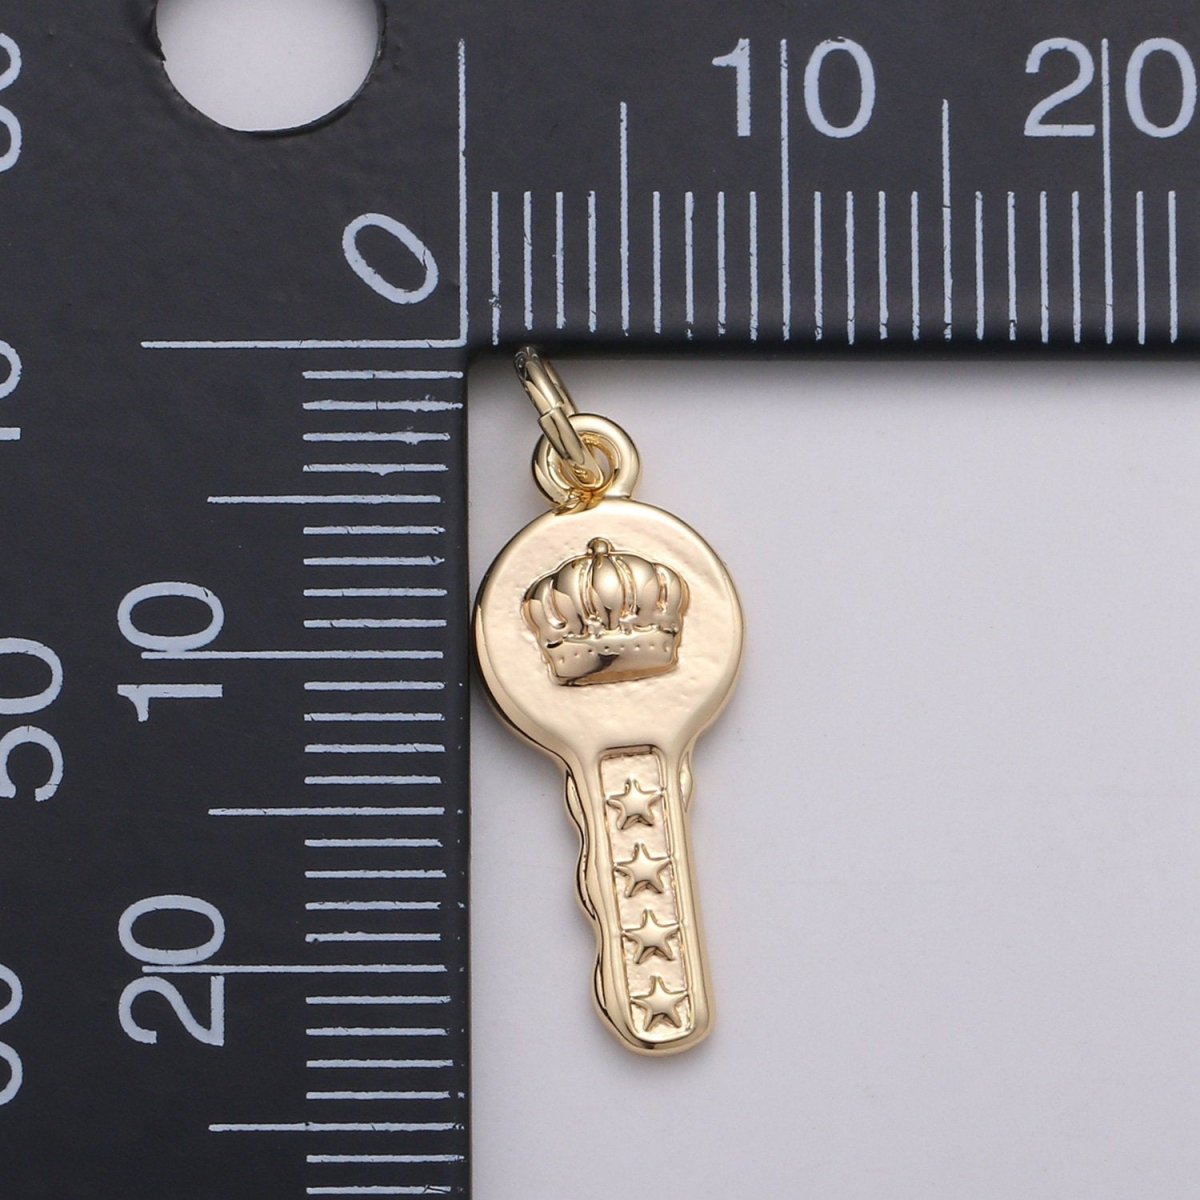 18k Gold Filled Key Pendant Charm, Dainty Crown Key Pendant Charm, Gold Filled Key of Heaven Pendant, For DIY Jewelry Making Supply D-742 - DLUXCA